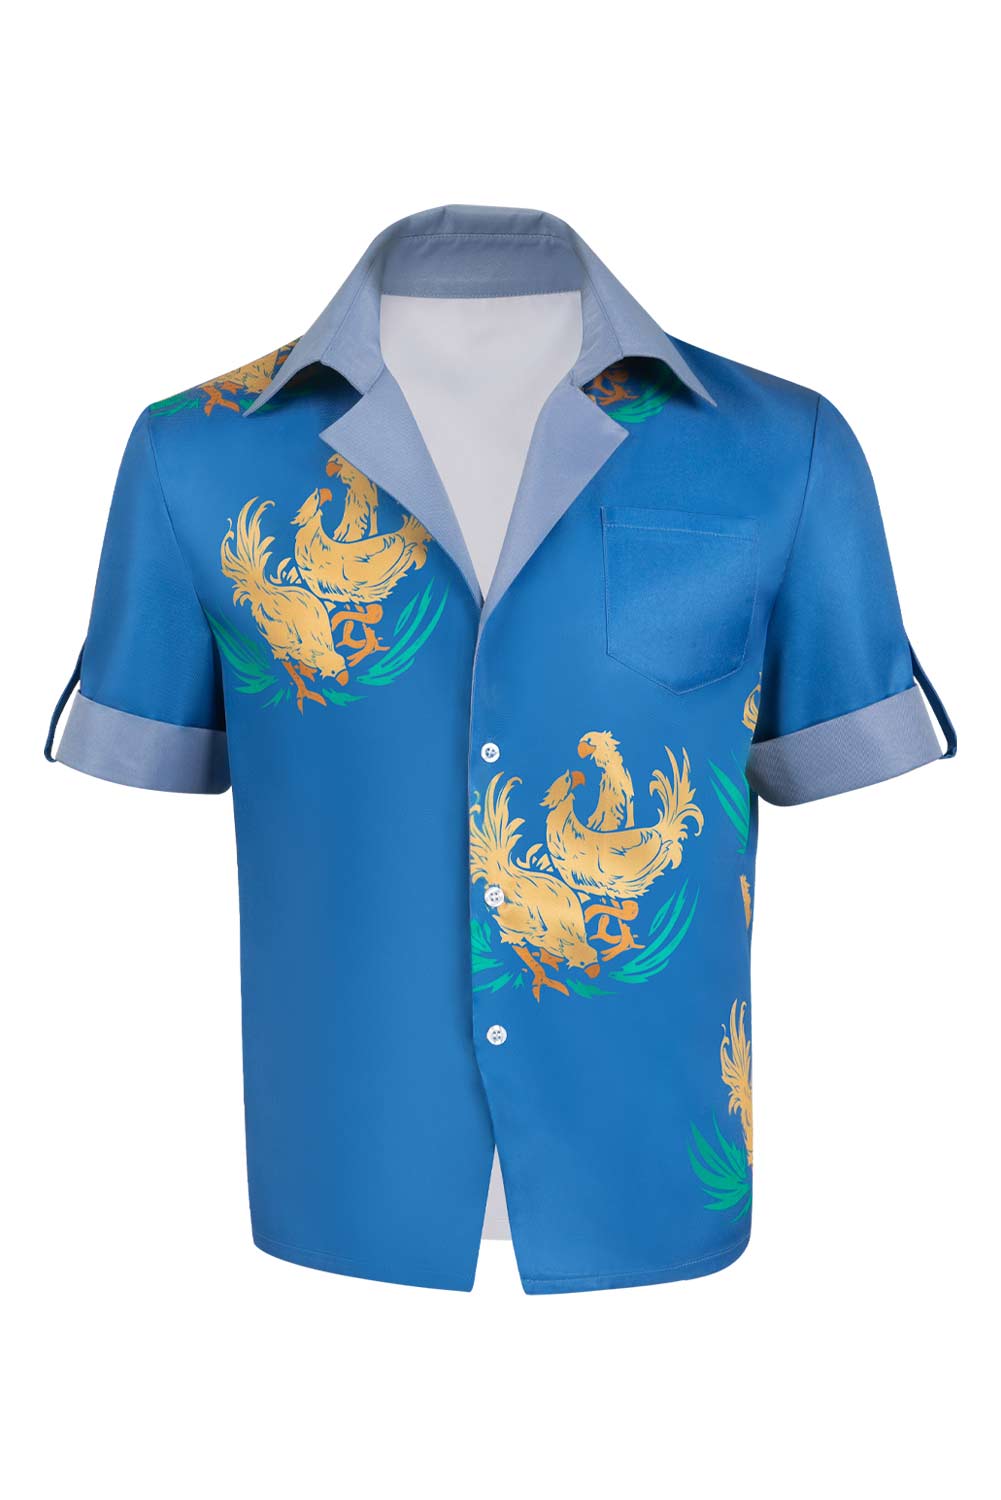 Game Final Fantasy VII Cloud Strife Cloud Chocobo Printed Blue Beach Shirt Outfits Halloween Carnival Suit Cosplay Costume